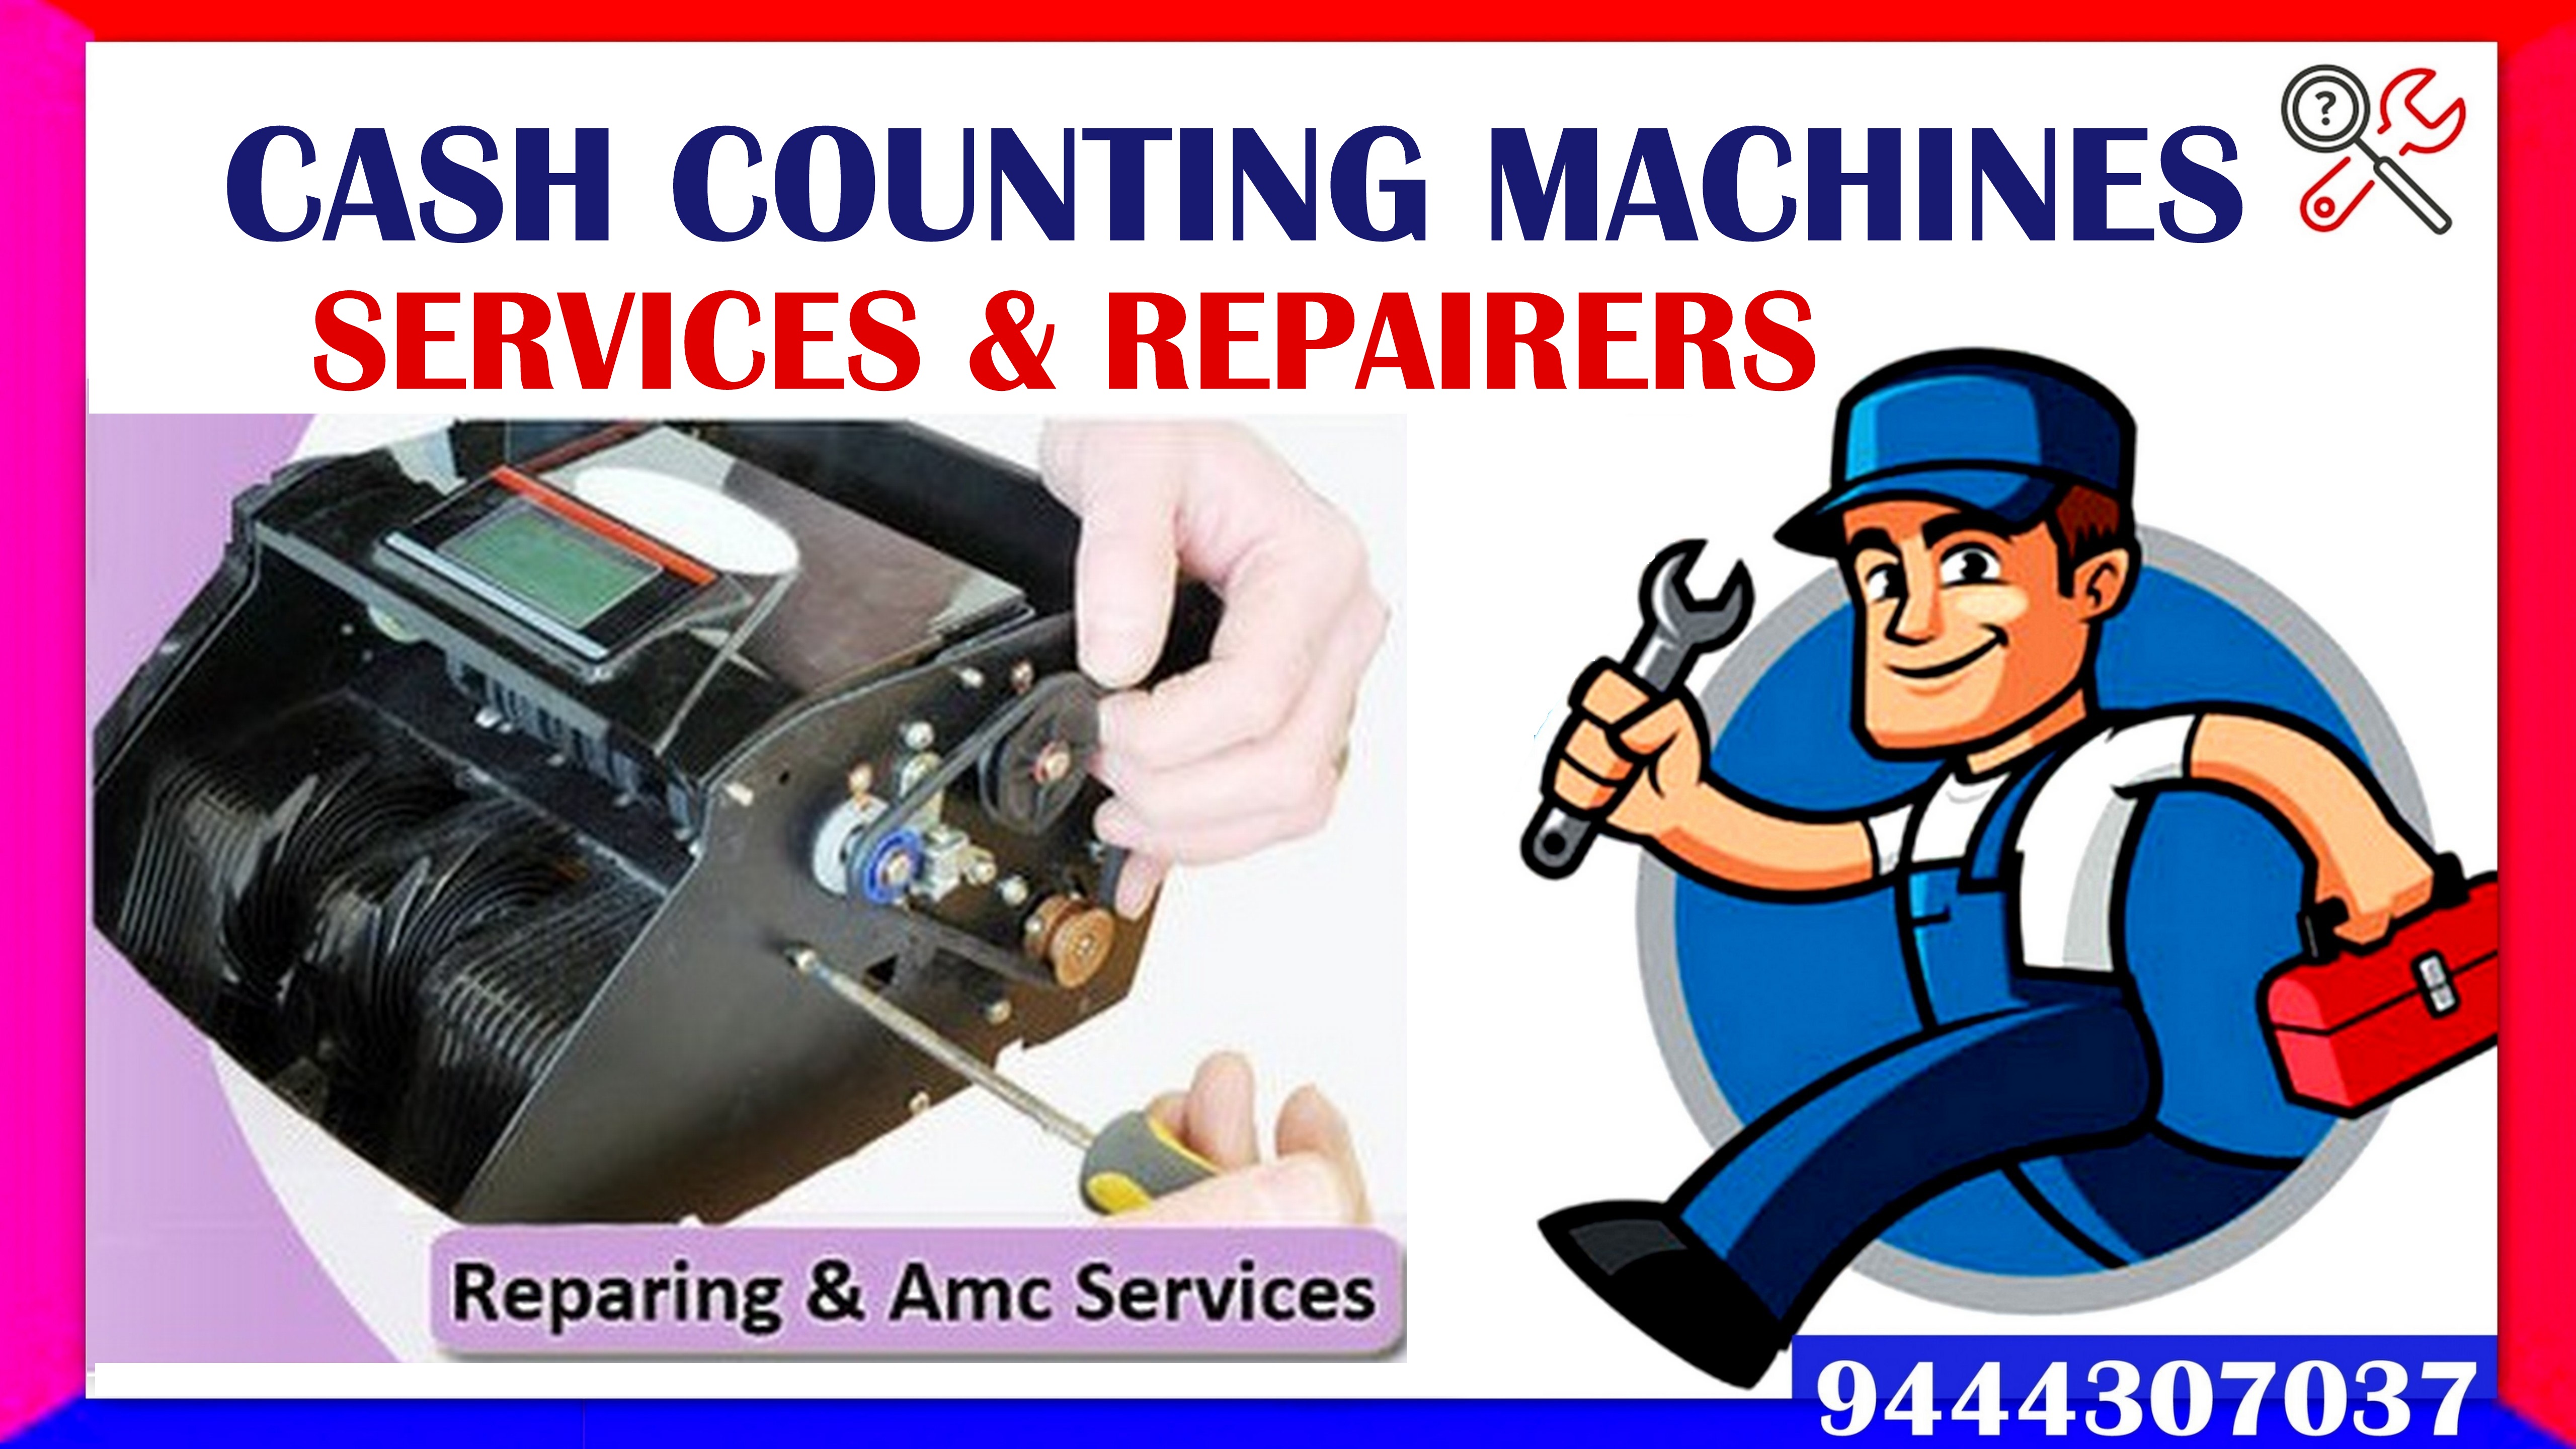 Cash Counting Machines Repairs In India Currency Counting Machines Repairer Services Company Money Counter And Bill Counter Machines Repairers Cash Counting Machines Spare Parts And Internal Parts For Sales Fake Note Detector